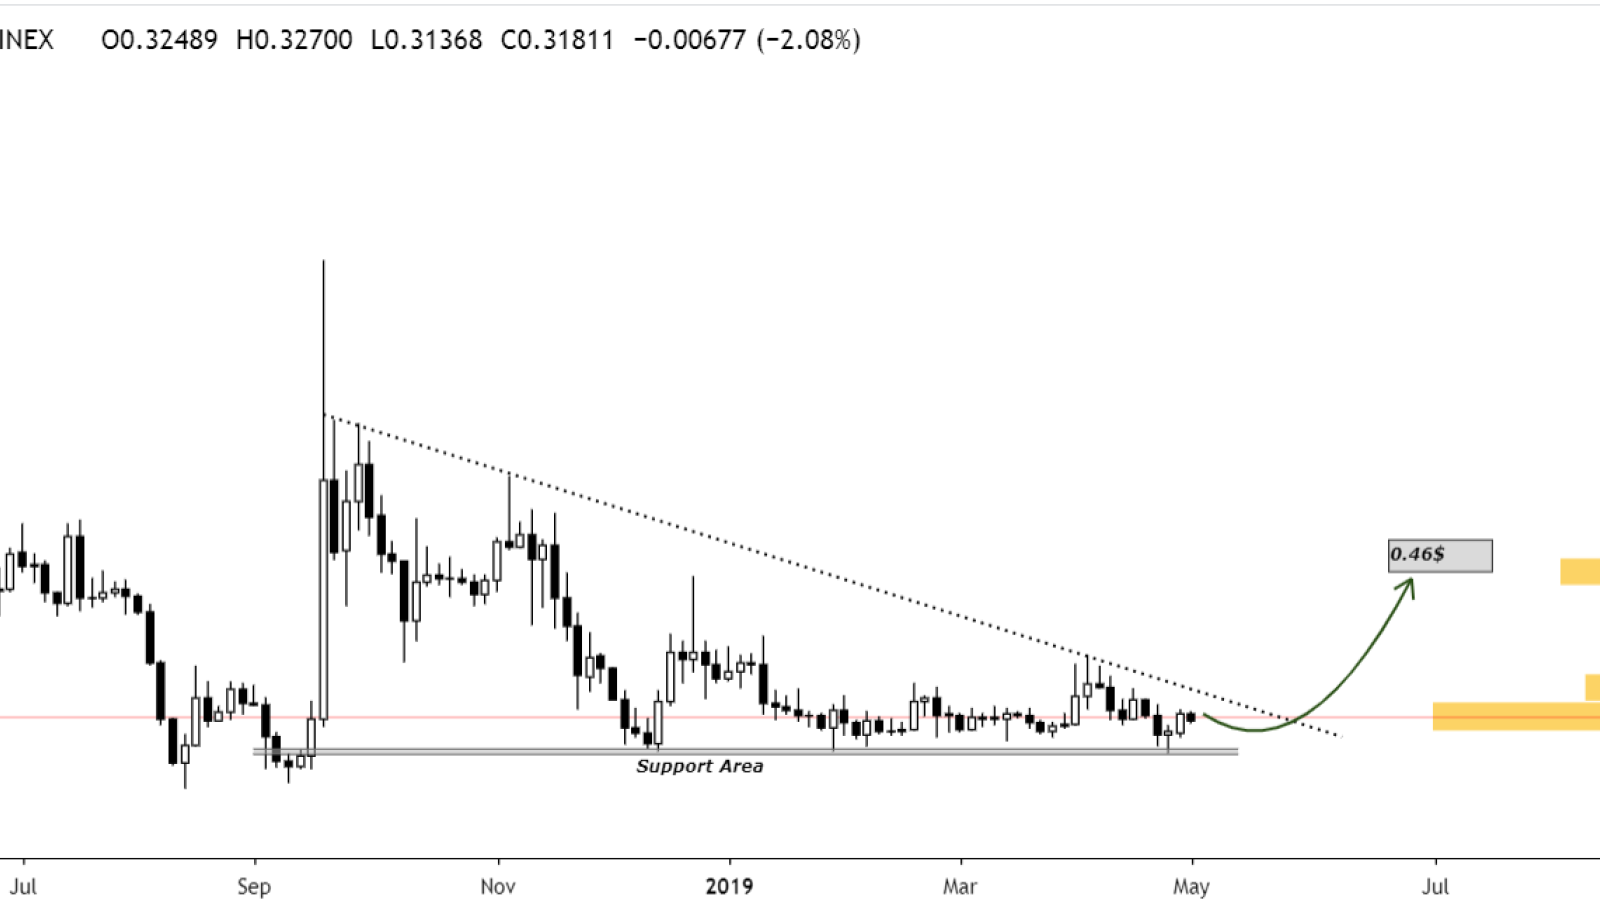 The support might be accumulated within 2 weeks